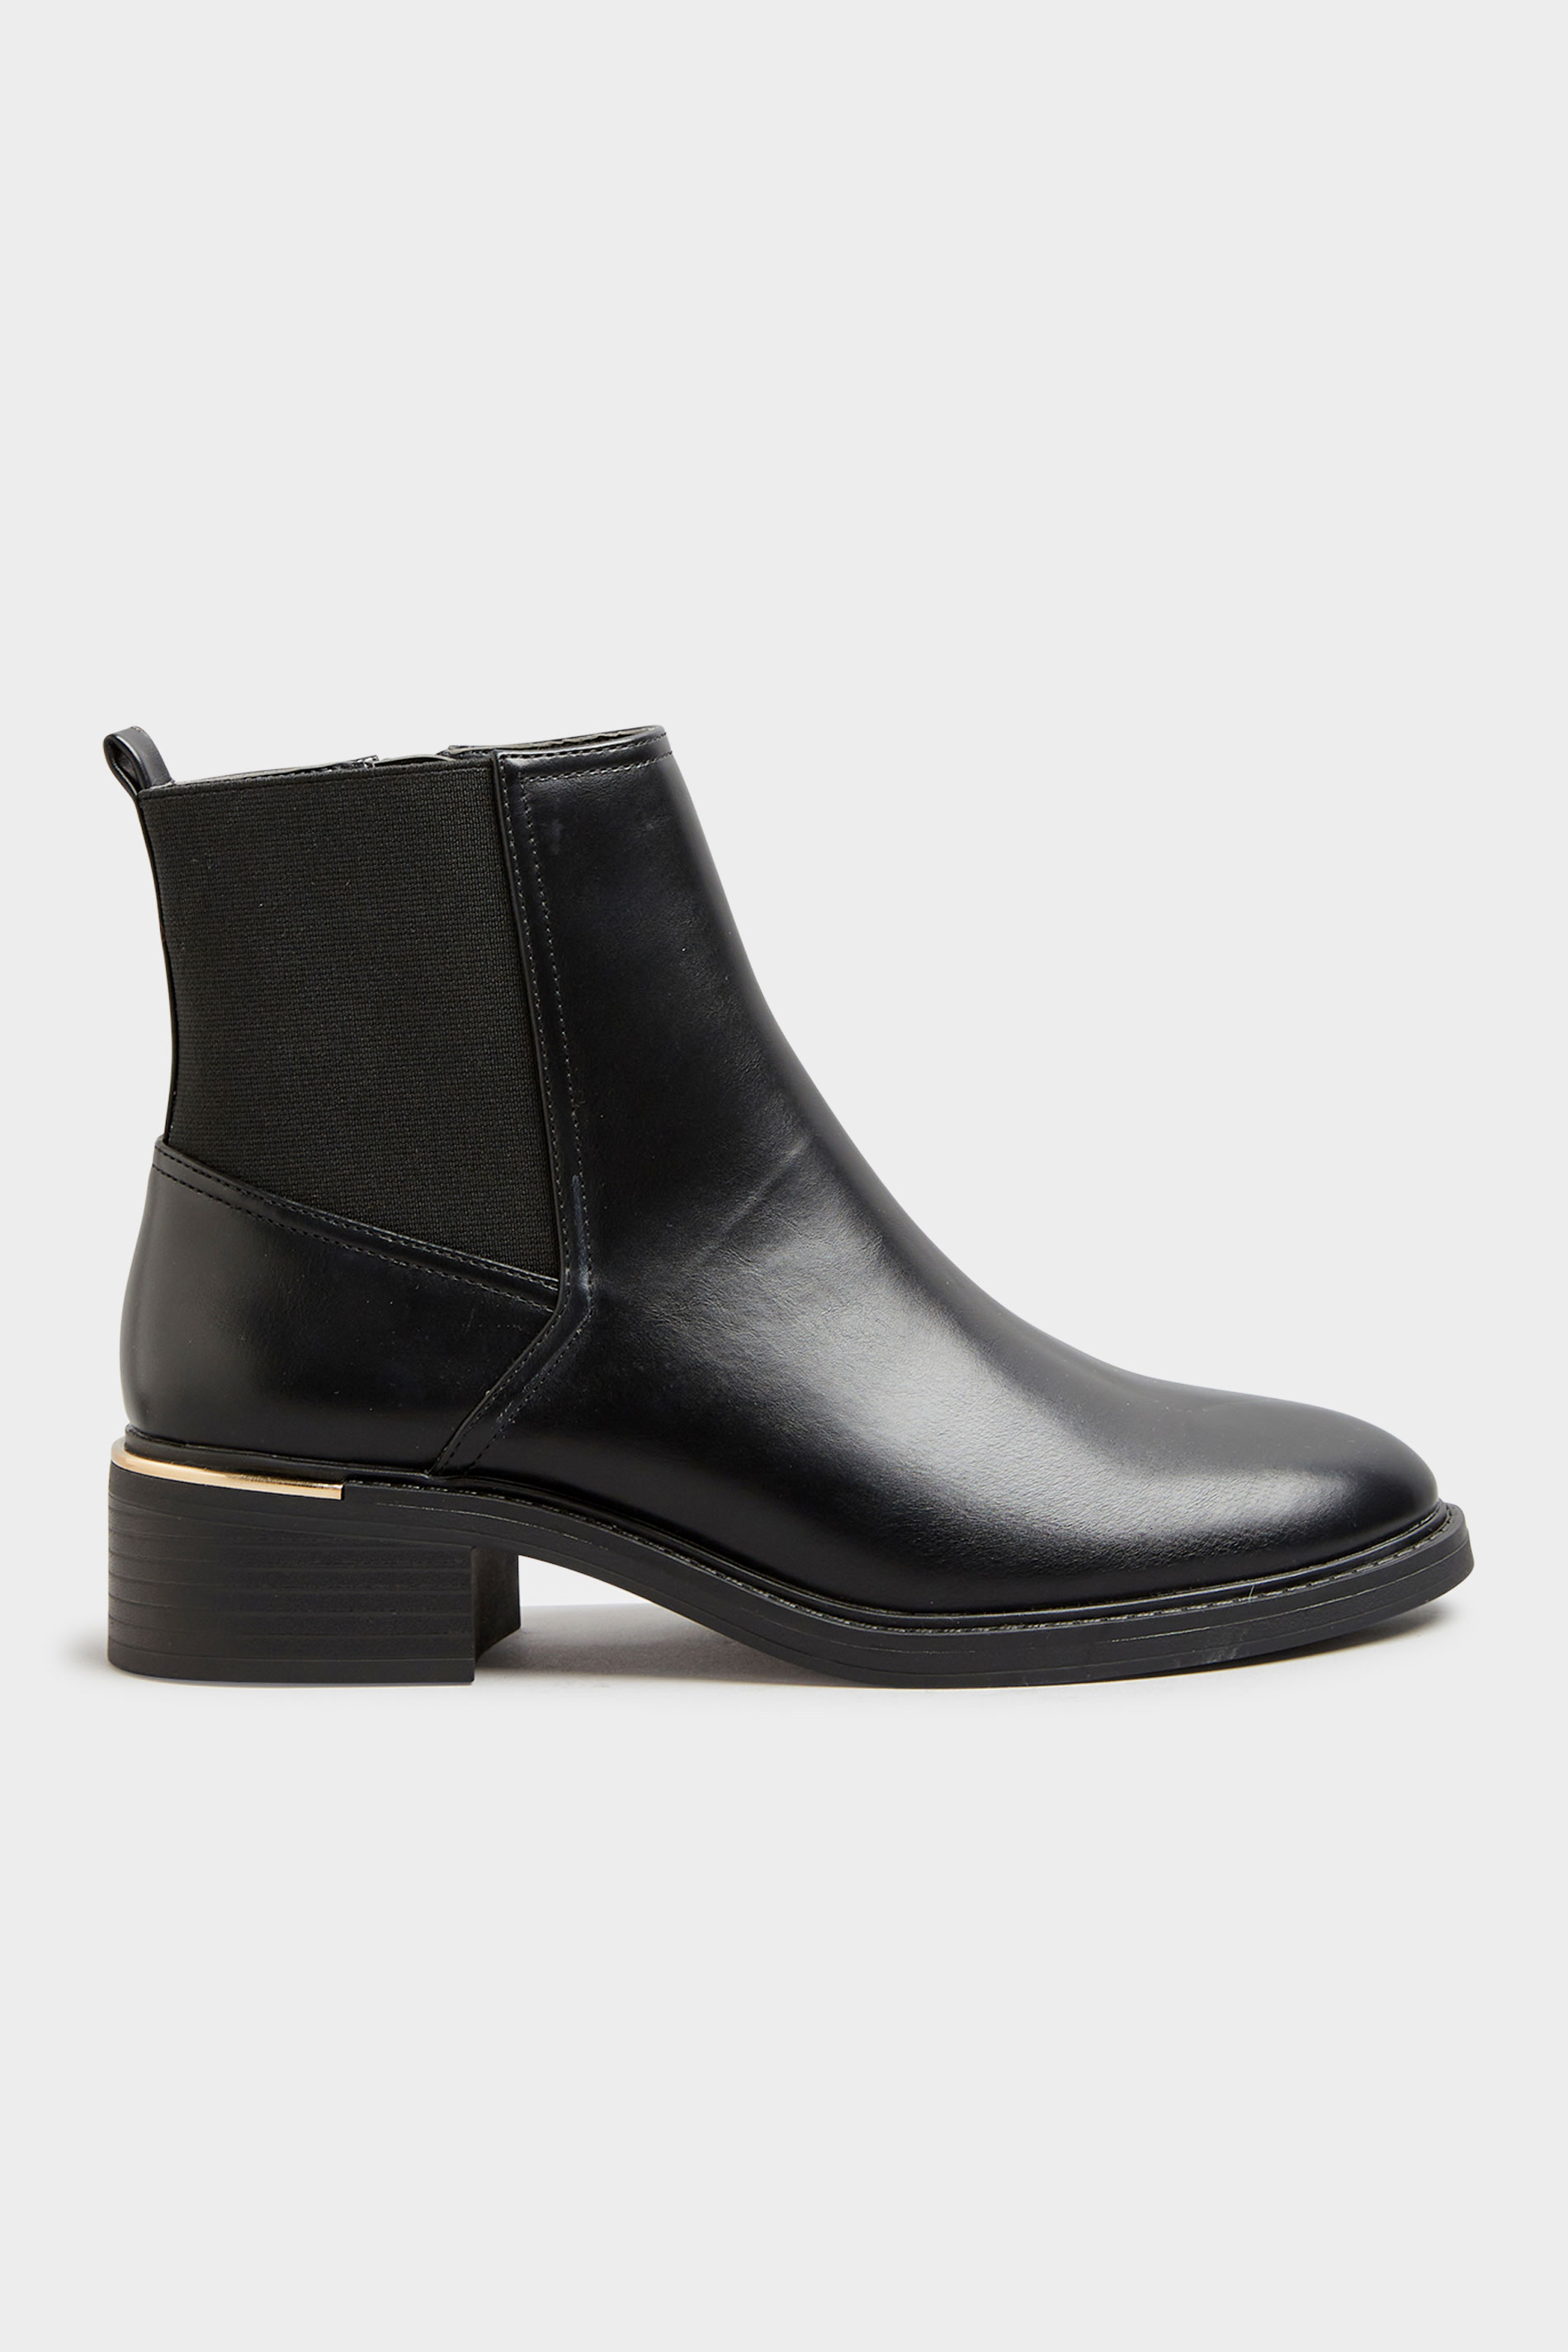 LTS Black Metal Trim Chelsea Boots In Standard Fit | Long Tall Sally